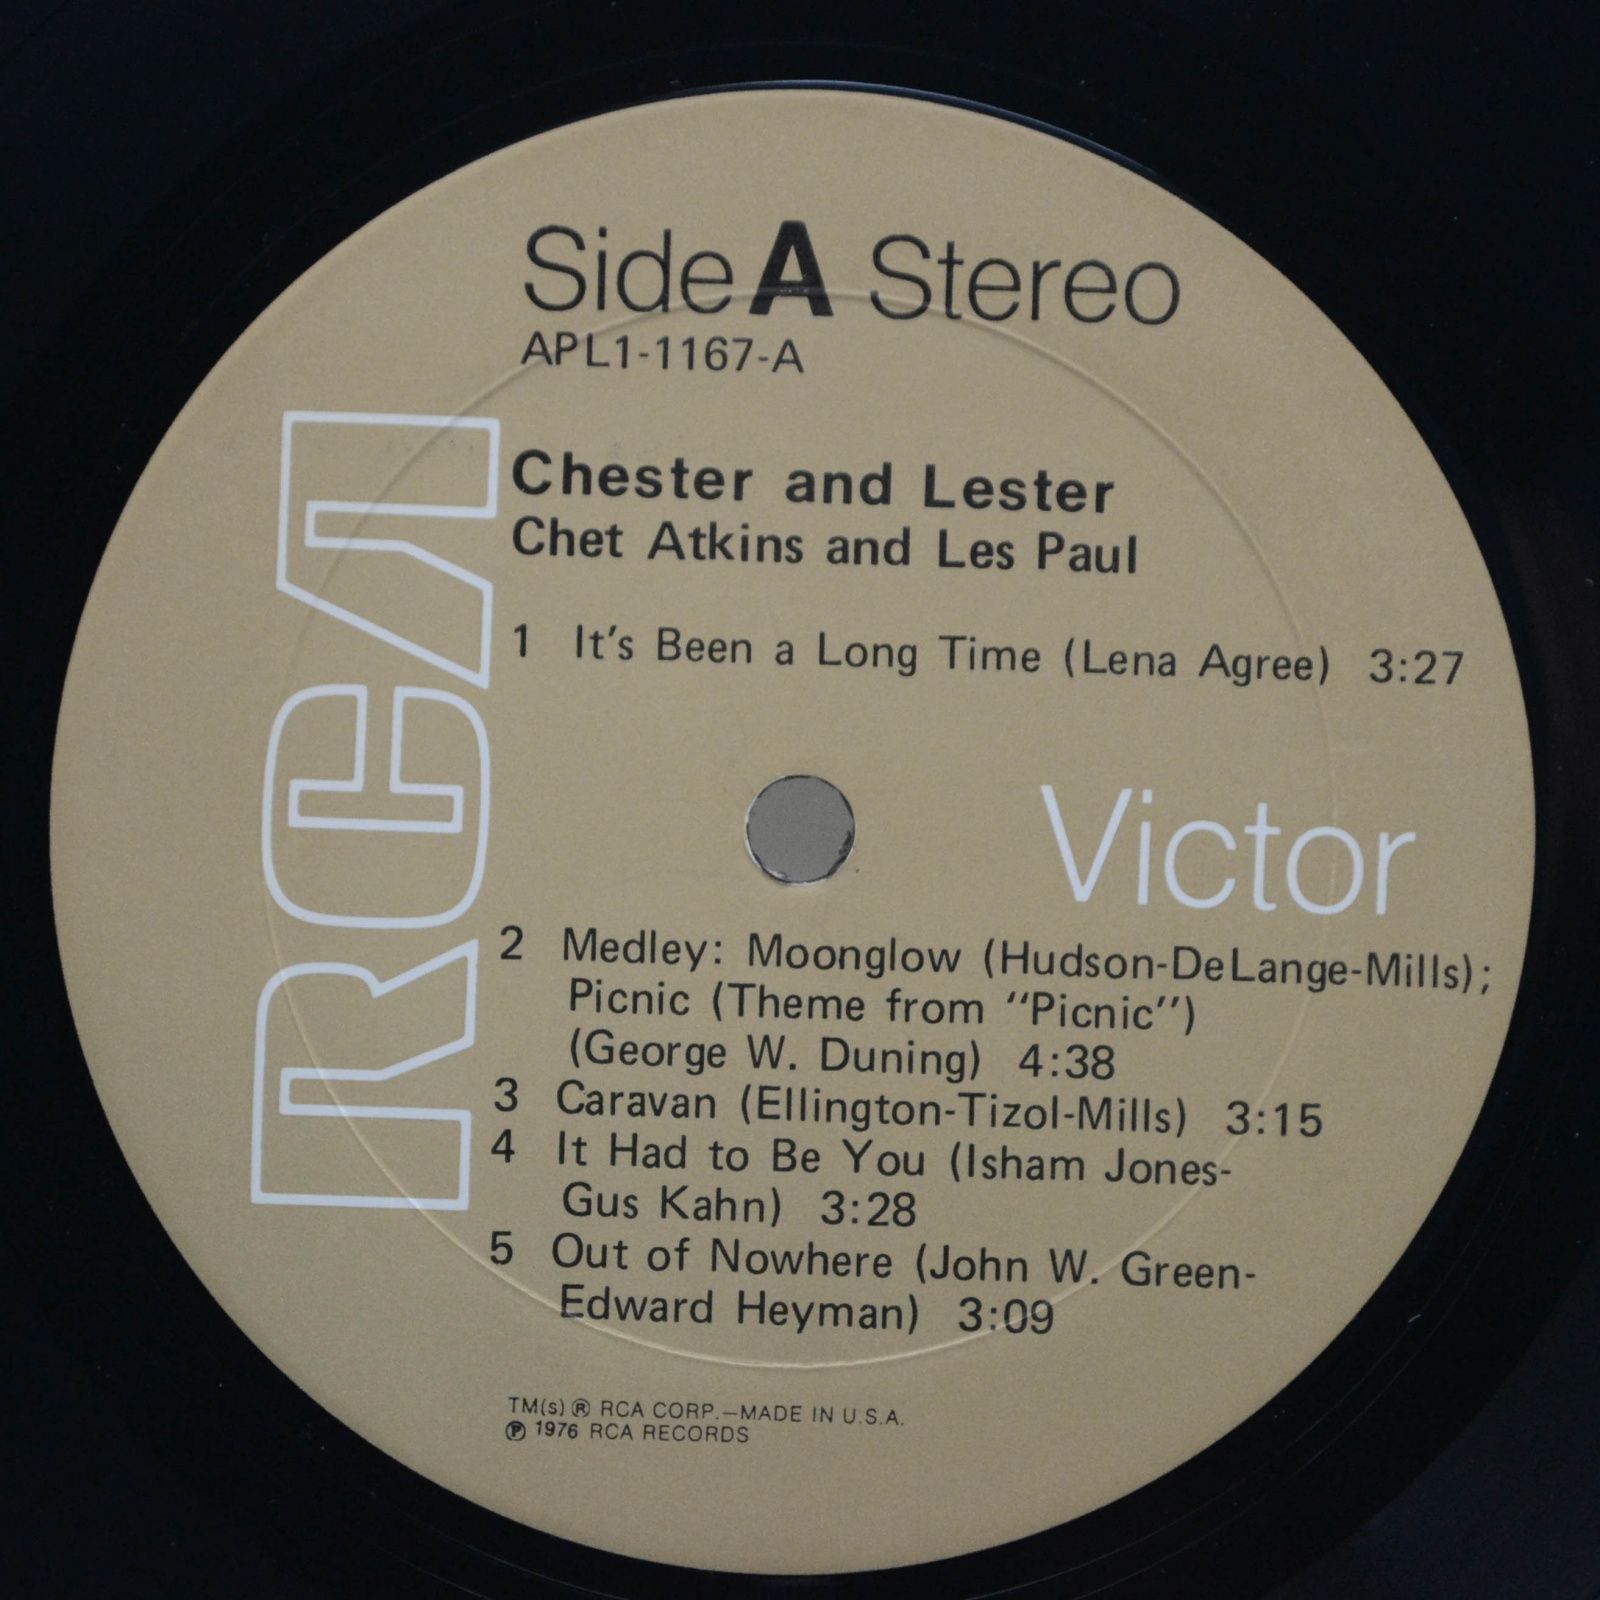 Chet Atkins And Les Paul — Chester & Lester (USA), 1976